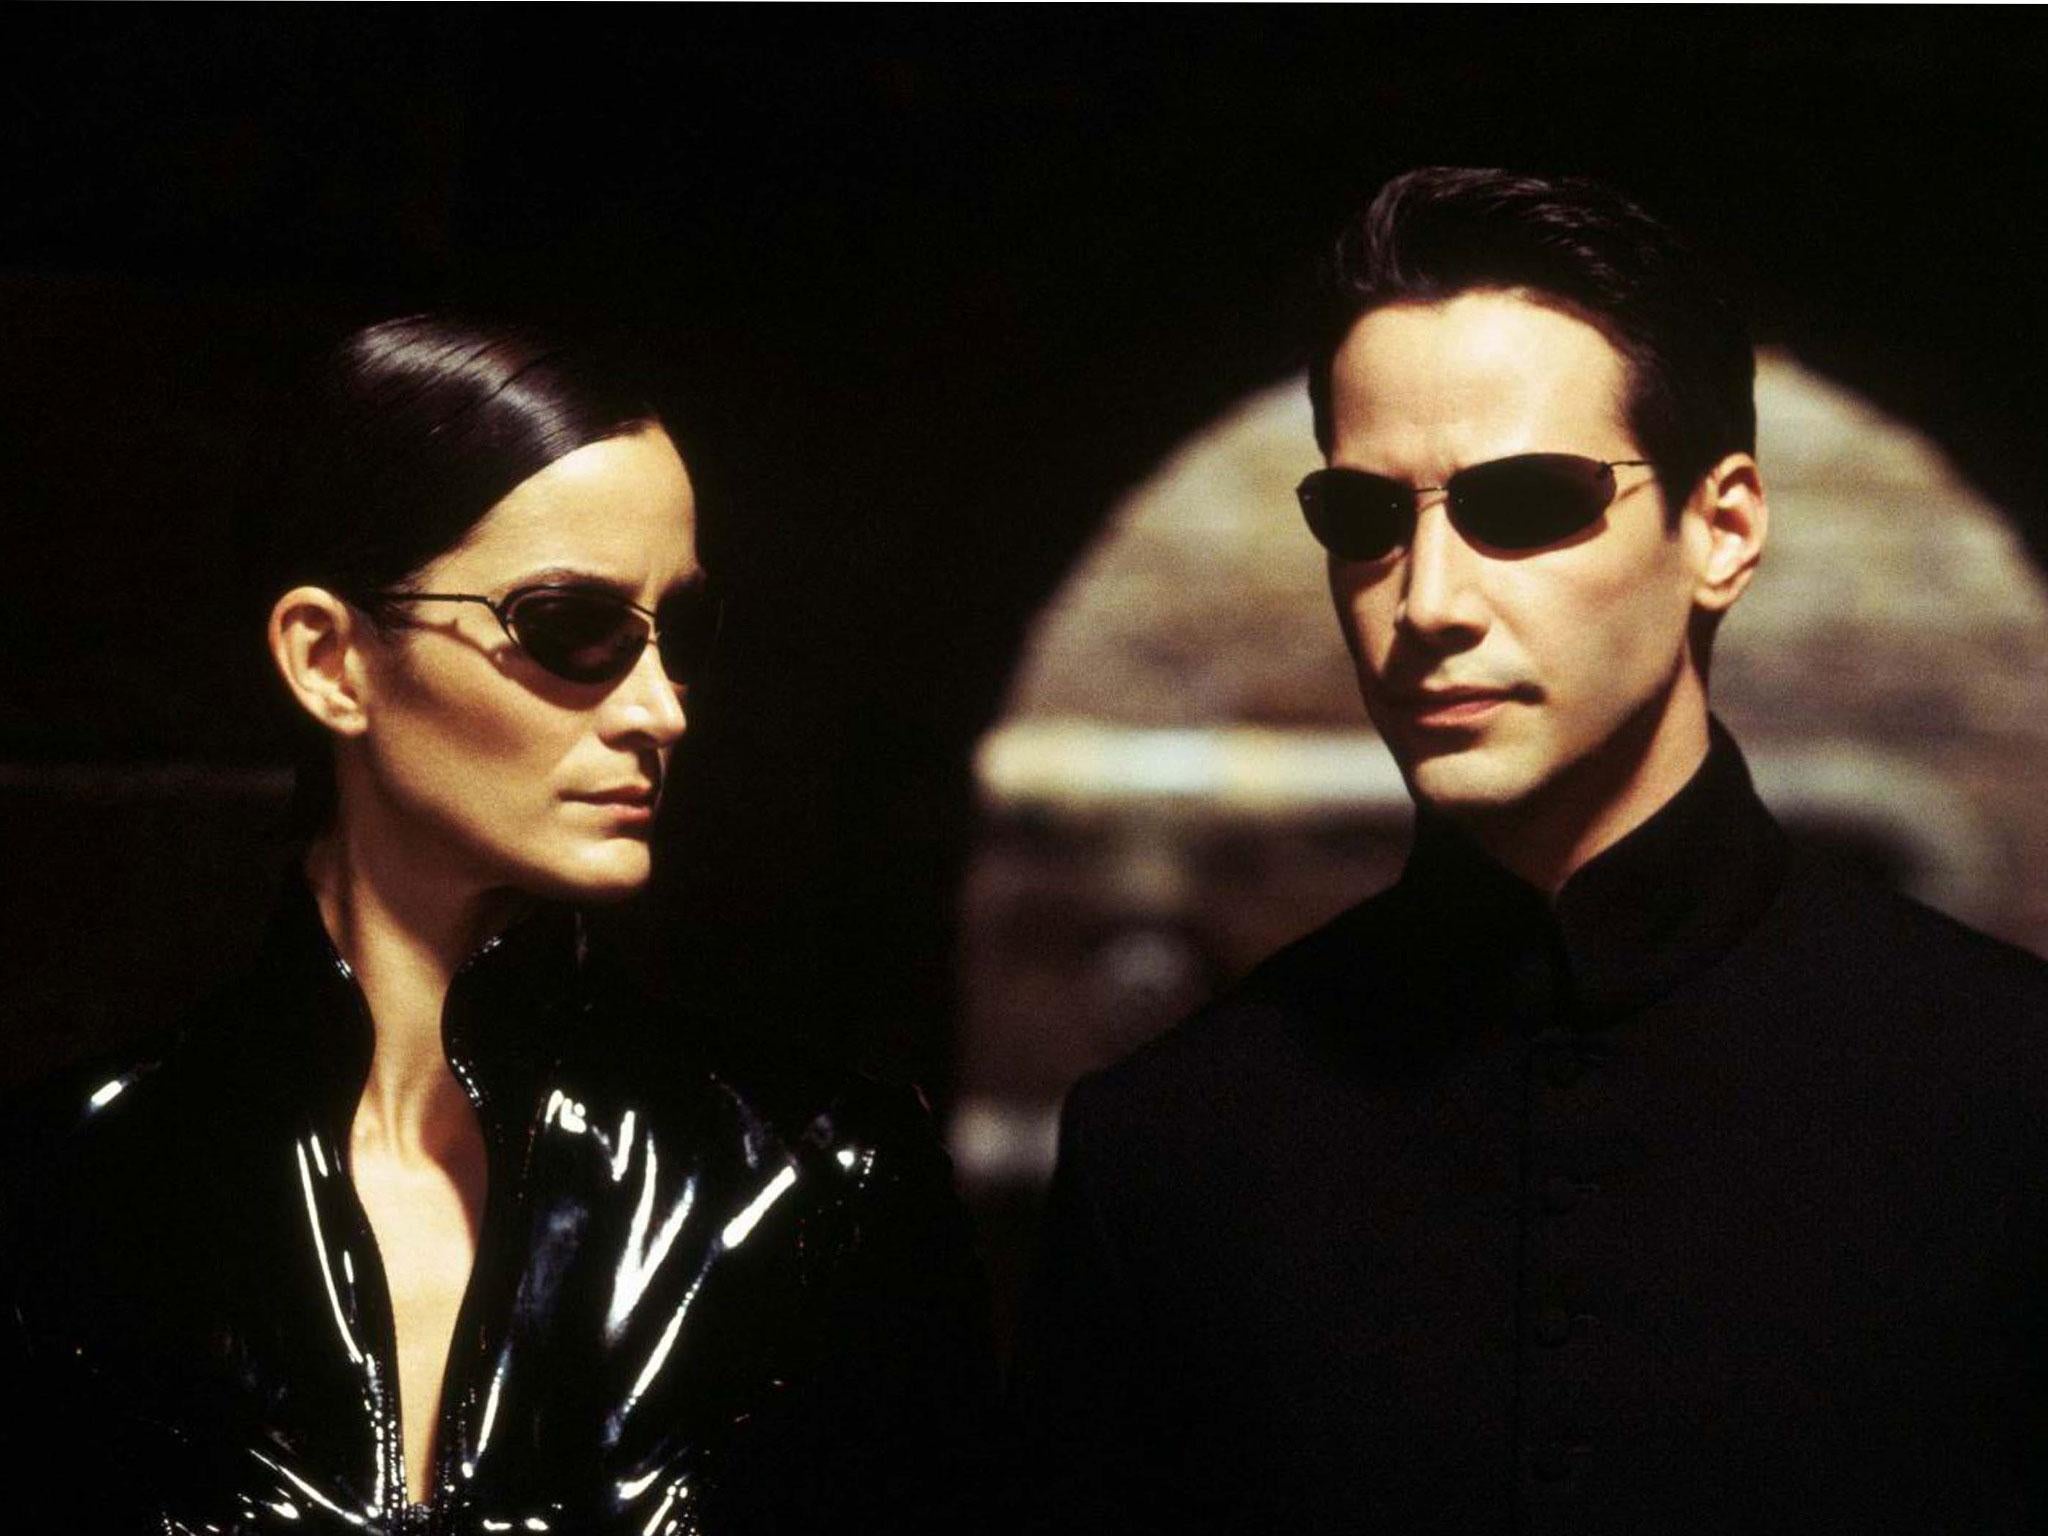 Carrie-Anne Moss as Trinity and Keanu Reeves as Neo in ‘The Matrix’